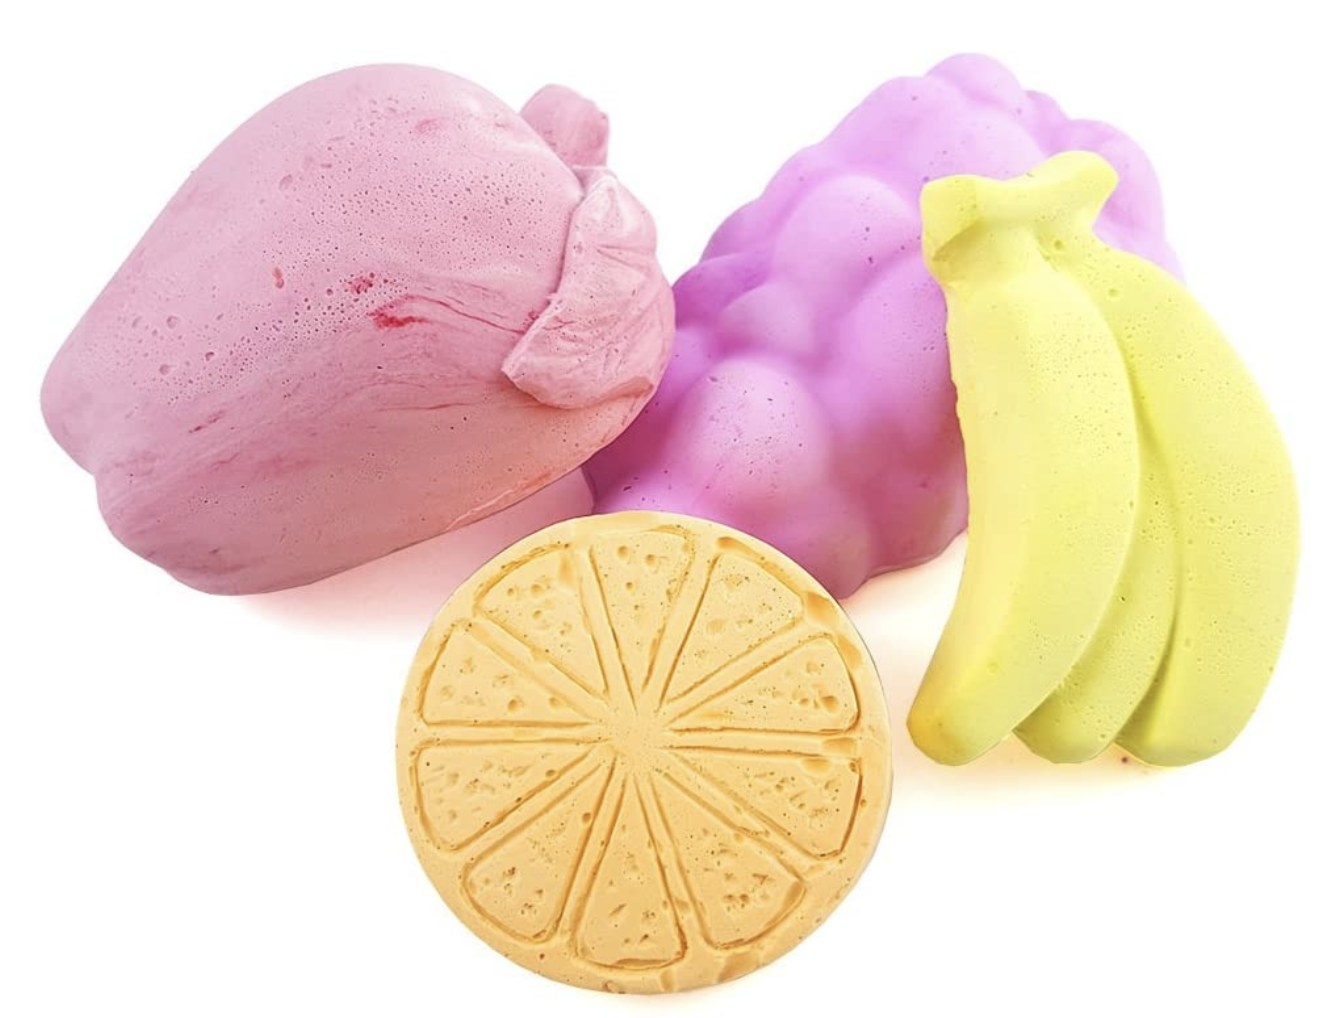 Pastel-colored fruit toys 